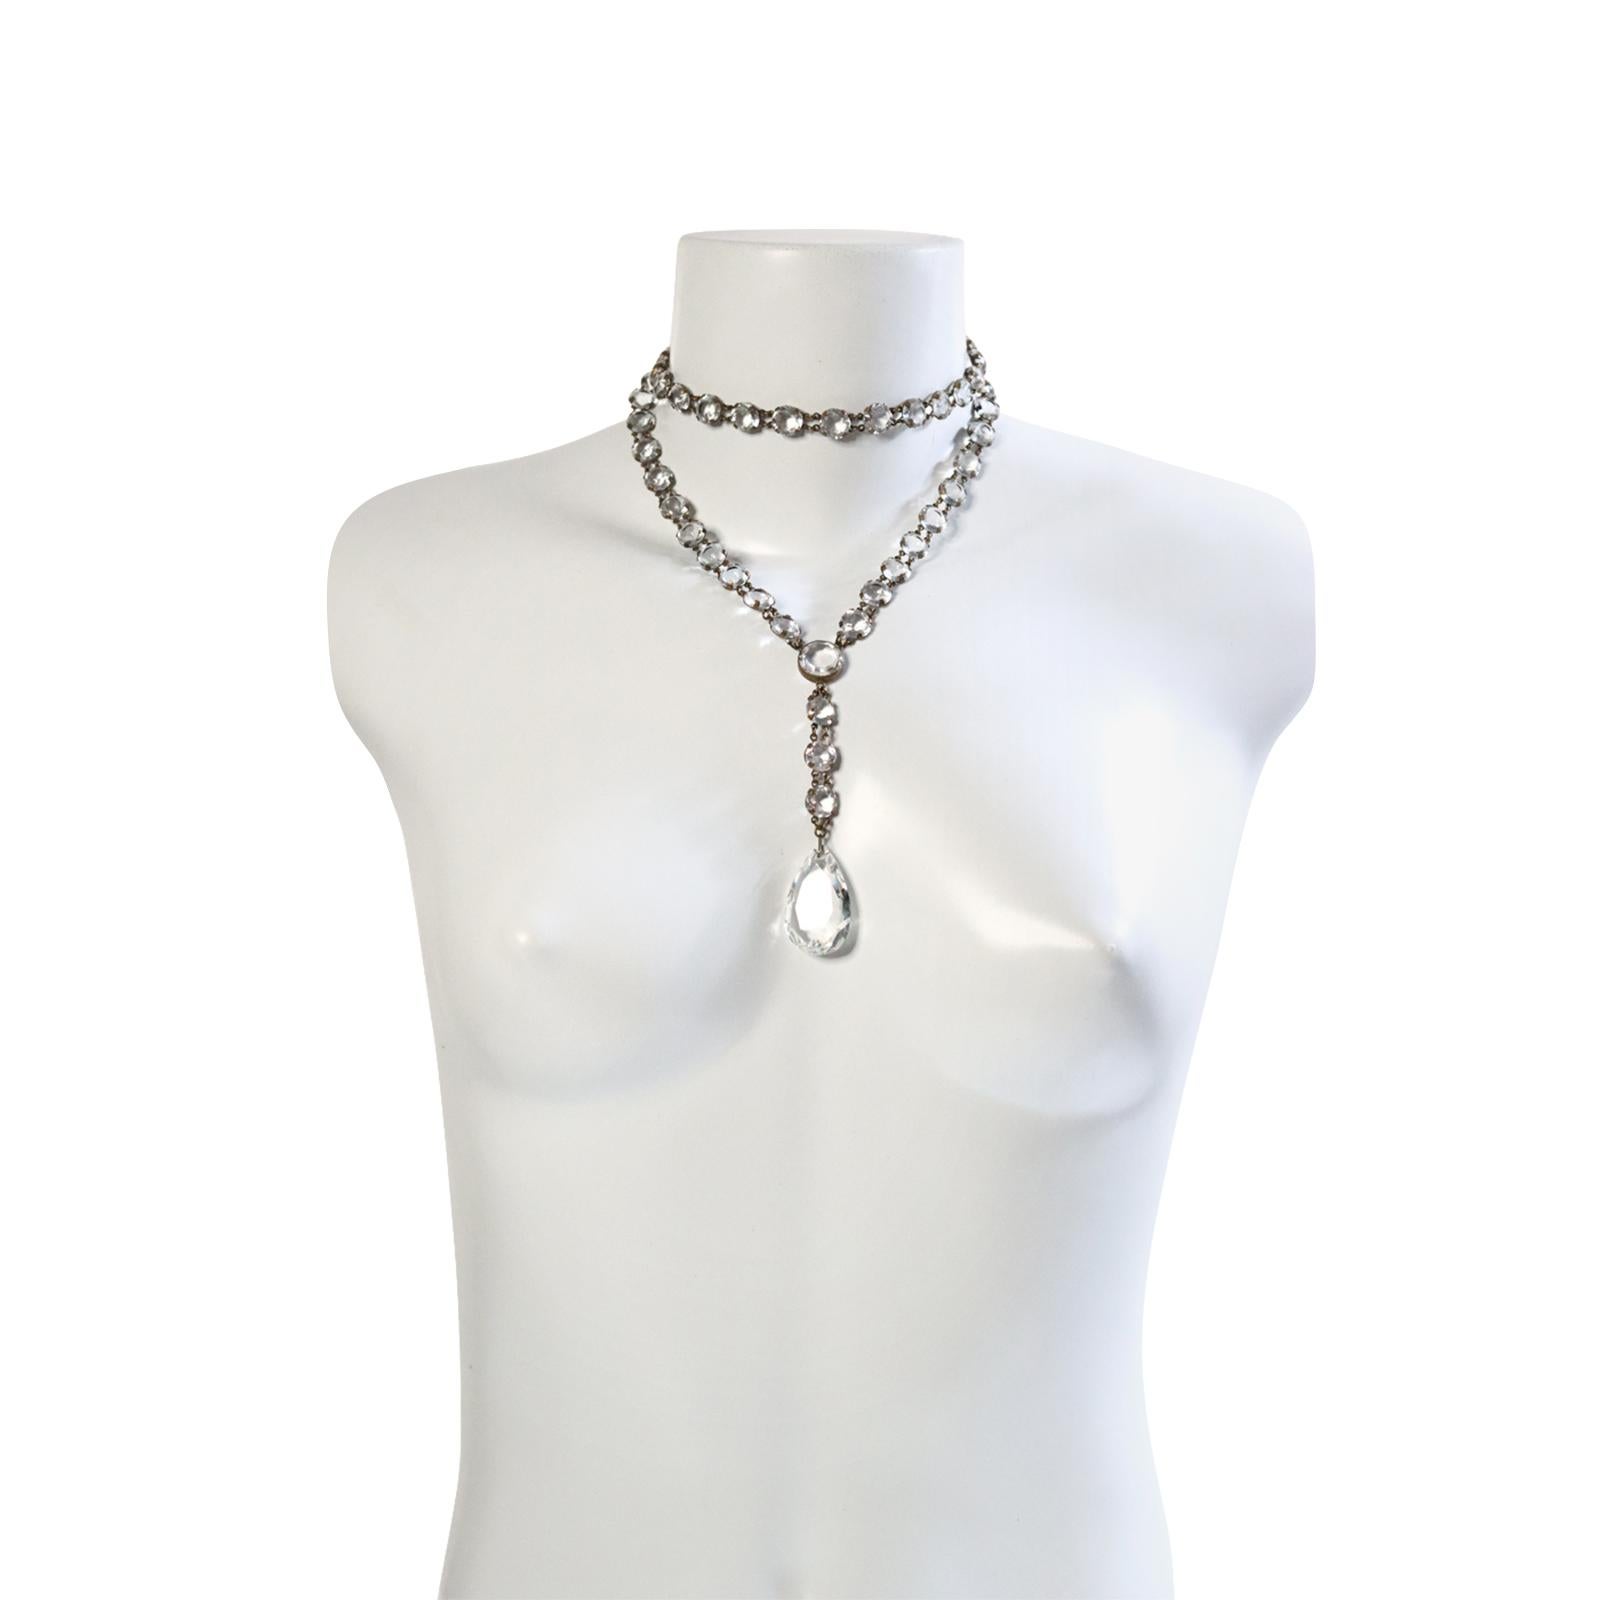 Vintage Open Back Crystal Sautoir Necklace with Dangling Piece For Sale 11